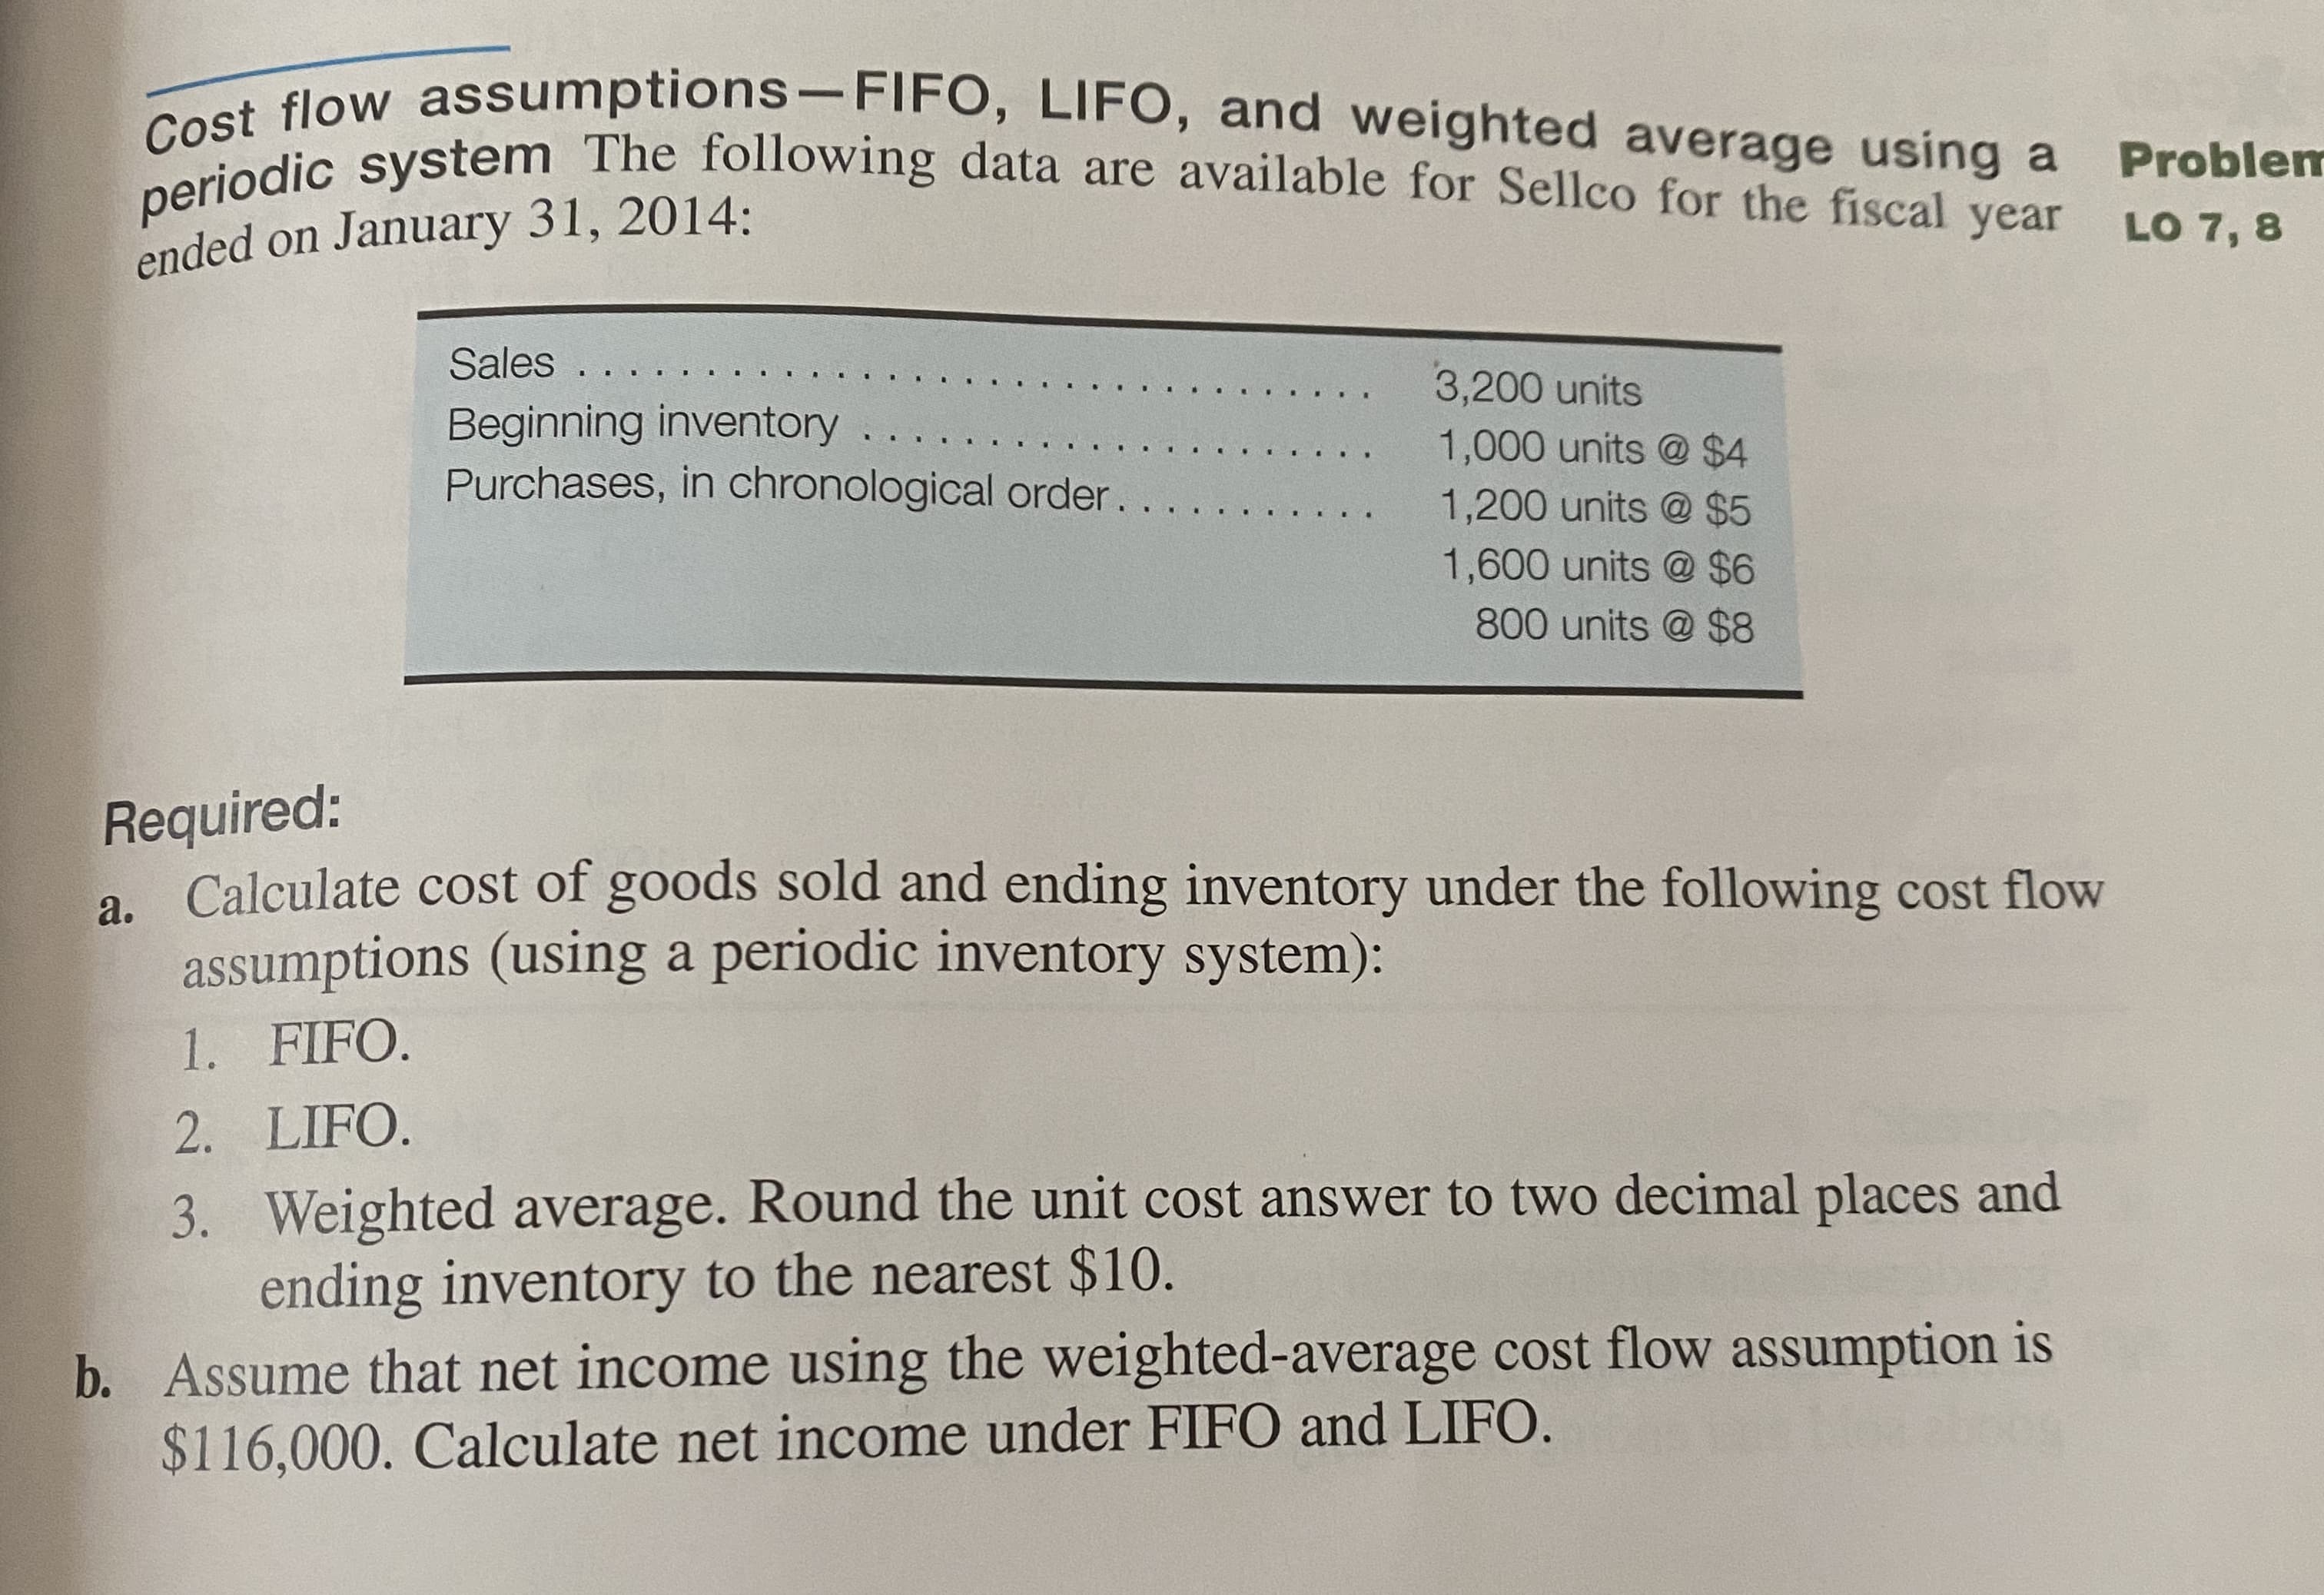 Required:
a. Calculate cost of goods sold and ending inventory under the following cost flow
assumptions (using a periodic inventory system):
1. FIFO.
2. LIFO.
3. Weighted average. Round the unit cost answer to two decimal places and
ending inventory to the nearest $10.
b. Assume that net income using the weighted-average cost flow assumption is
$116,000. Calculate net income under FIFO and LIFO.
